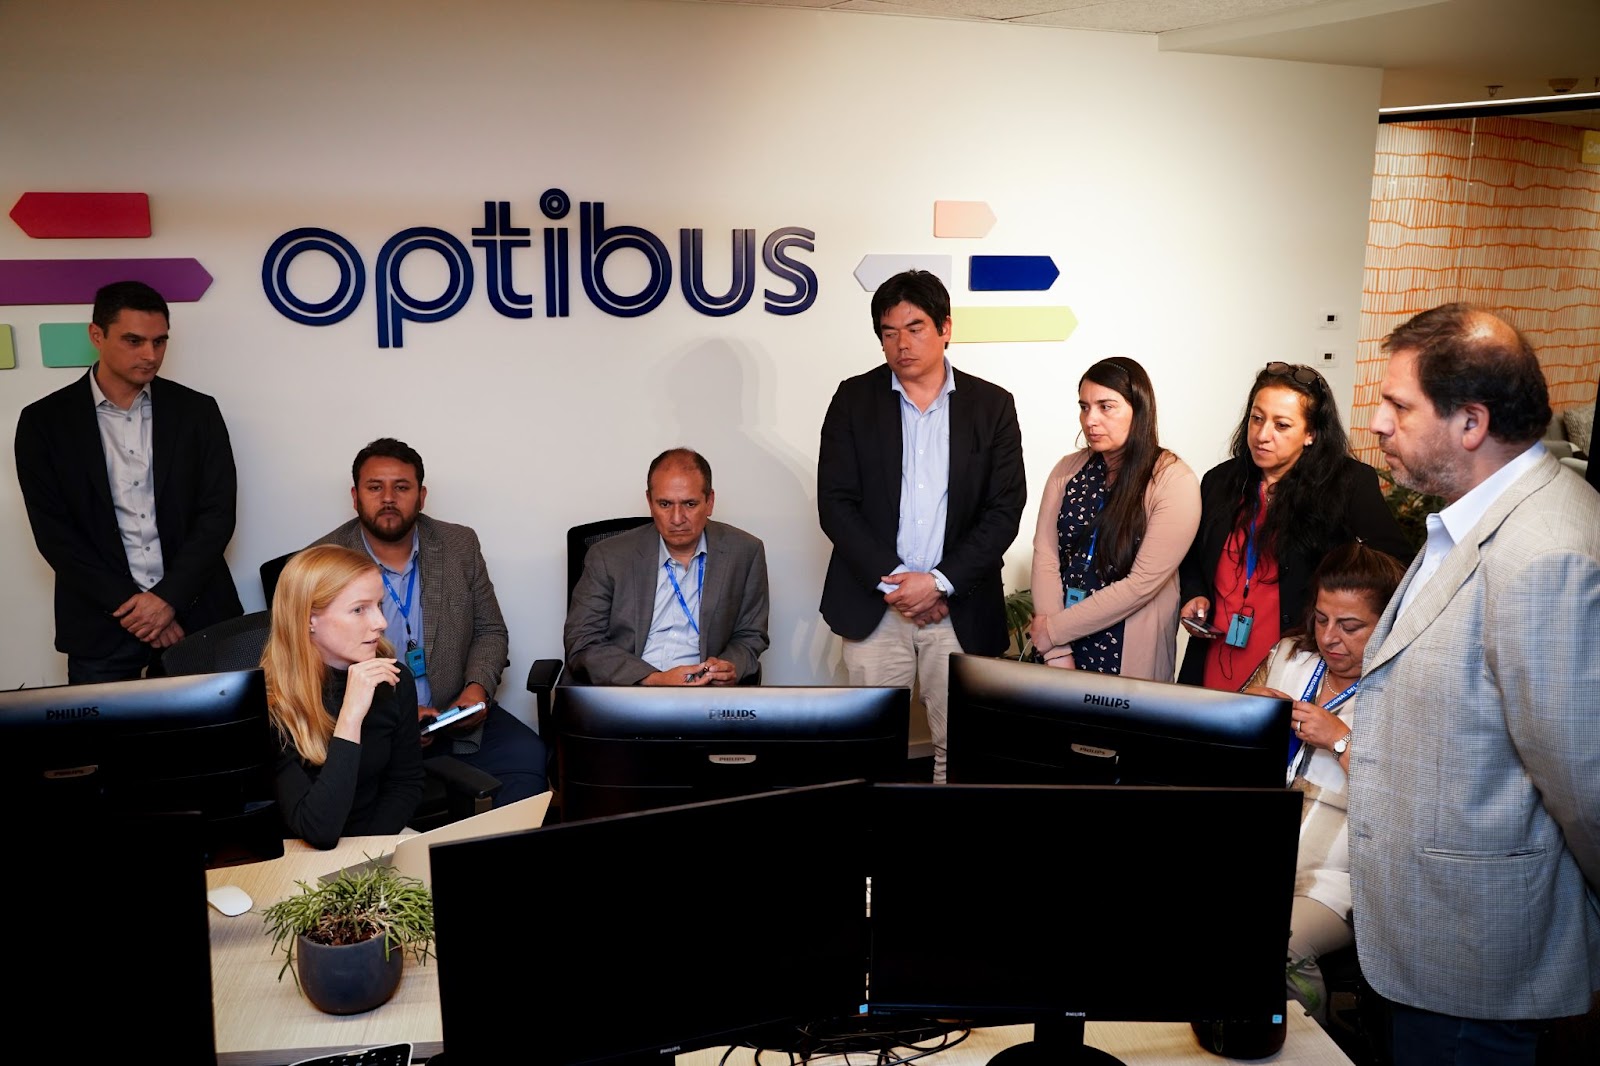 Optibus CEO and co-founder Amos Haggiag (standing, far left) and Catharina Michels, Presales Engineering Team Lead, EMEA (bottom left), demo the Optibus software for the BioBio delegation.